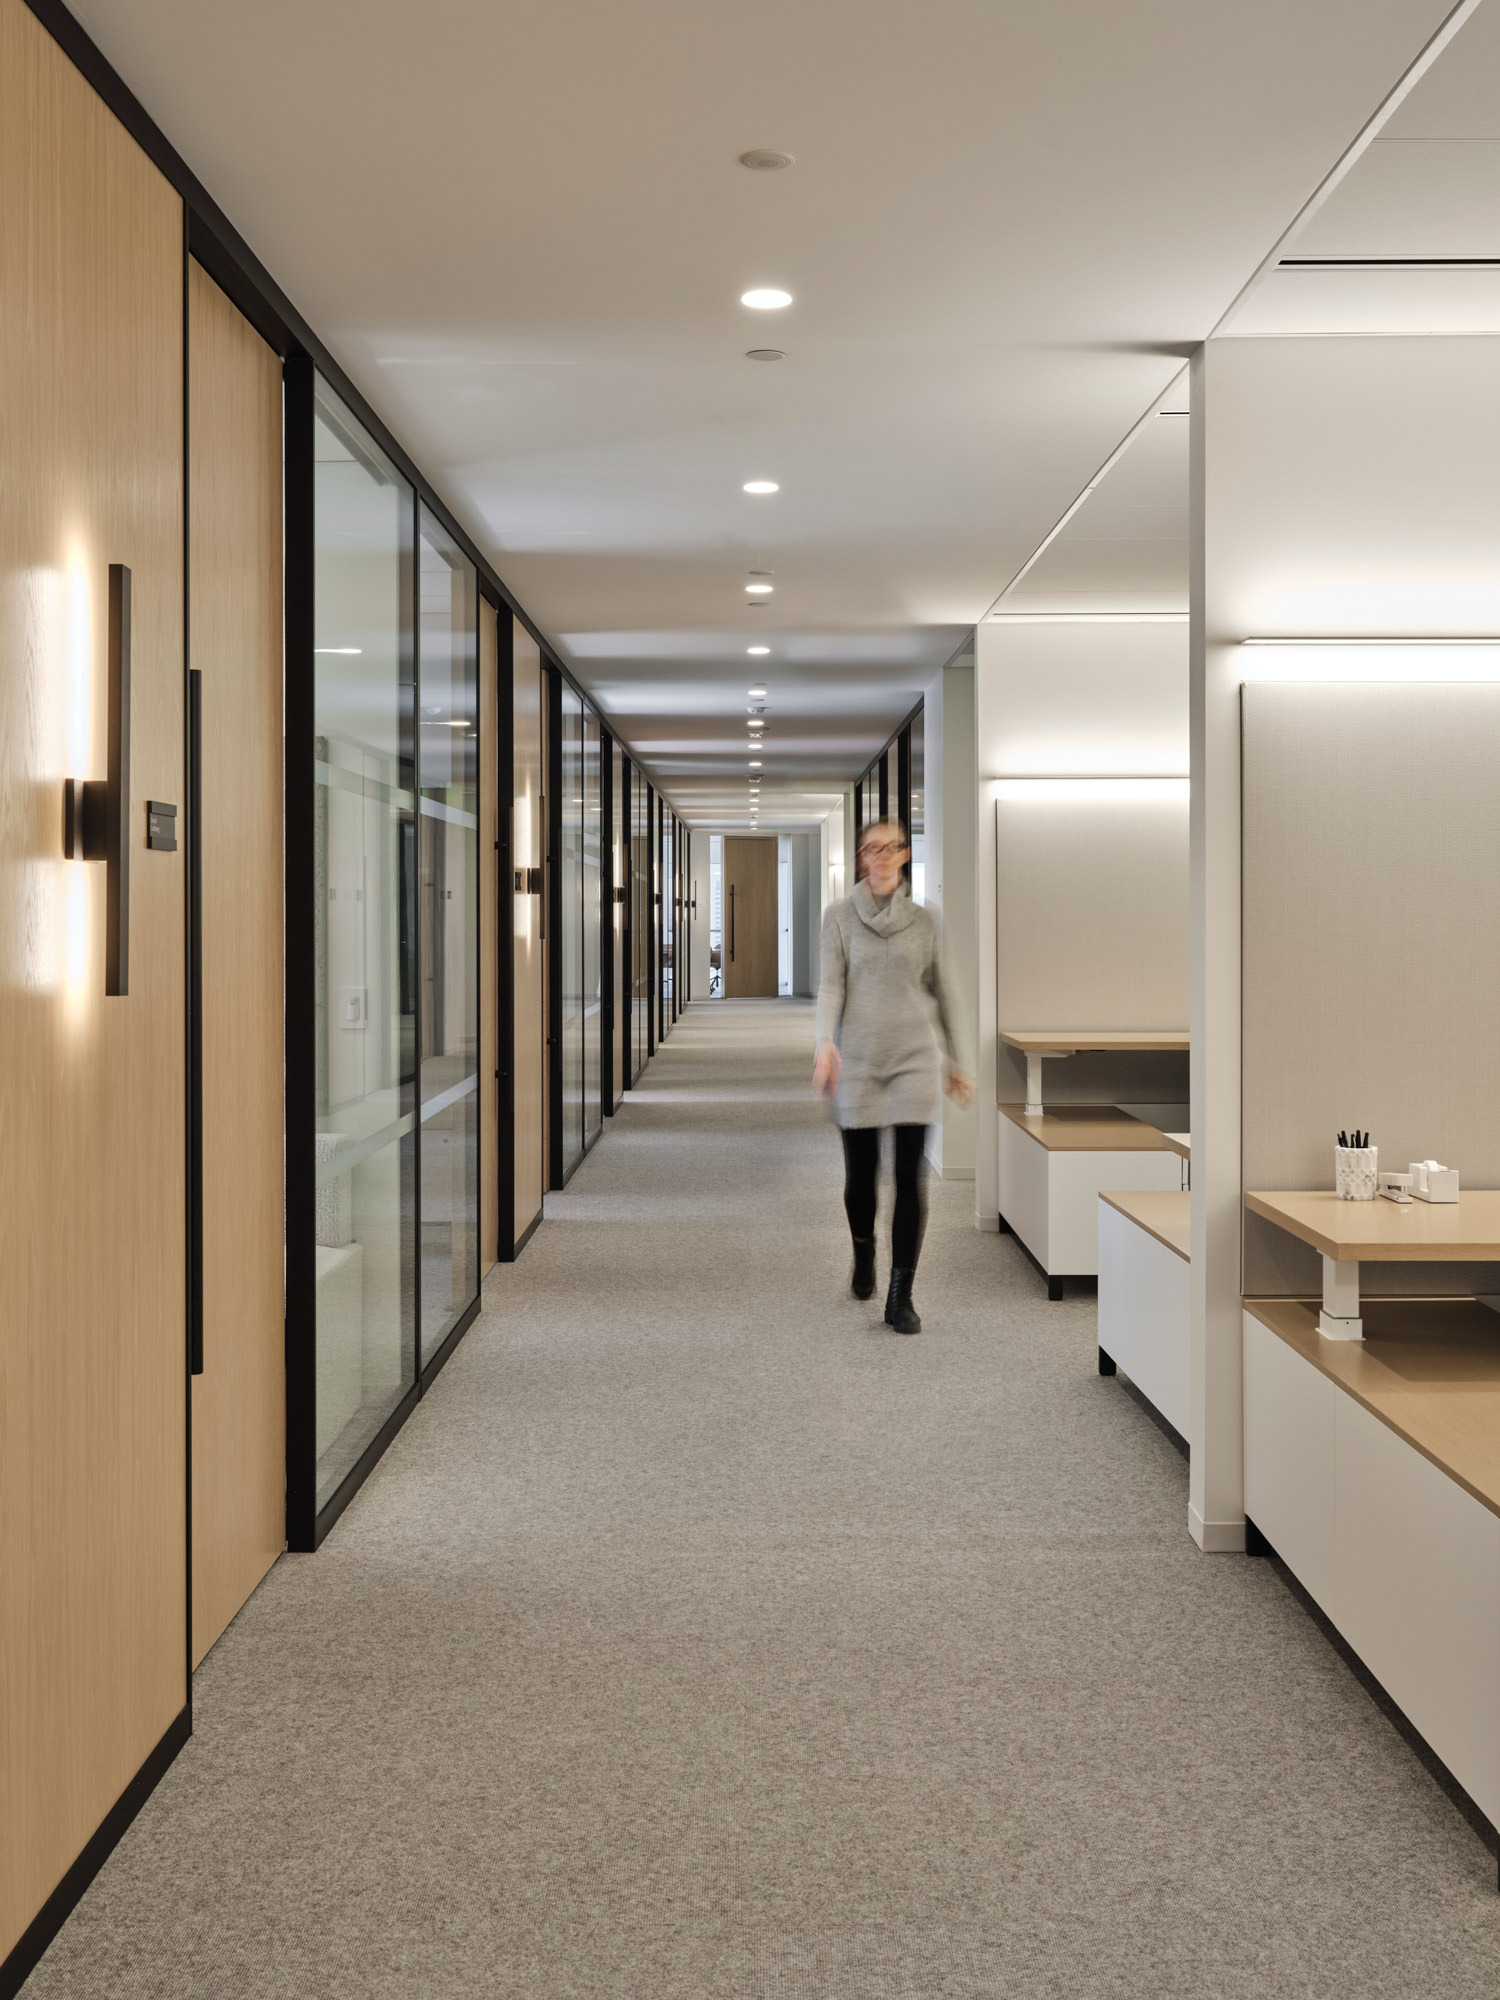 Modern office corridor featuring natural wood-framed glass partitions, recessed linear lighting, and textured grey carpeting. A person strides through, illustrating the space's human scale and flow. The design balances warmth and professionalism.